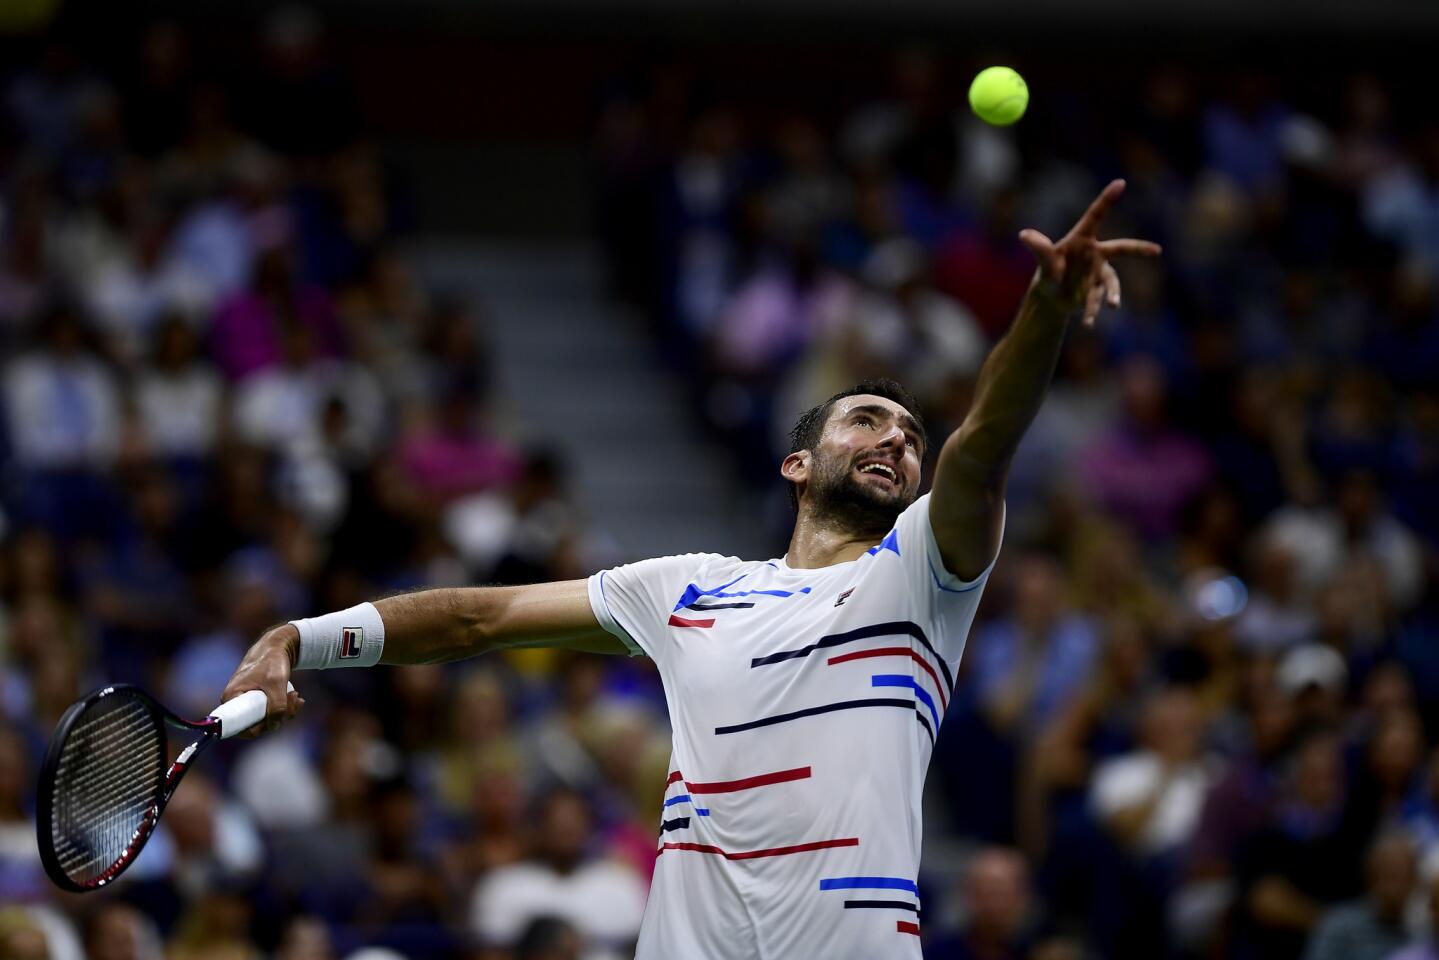 Marin Cilic of Croatia serves during his Men's Singles fourth-round match against Rafael Nadal of Spain on day eight of the 2019 U.S. Open at the USTA Billie Jean King National Tennis Center on Sept. 2, 2019, in Queens.